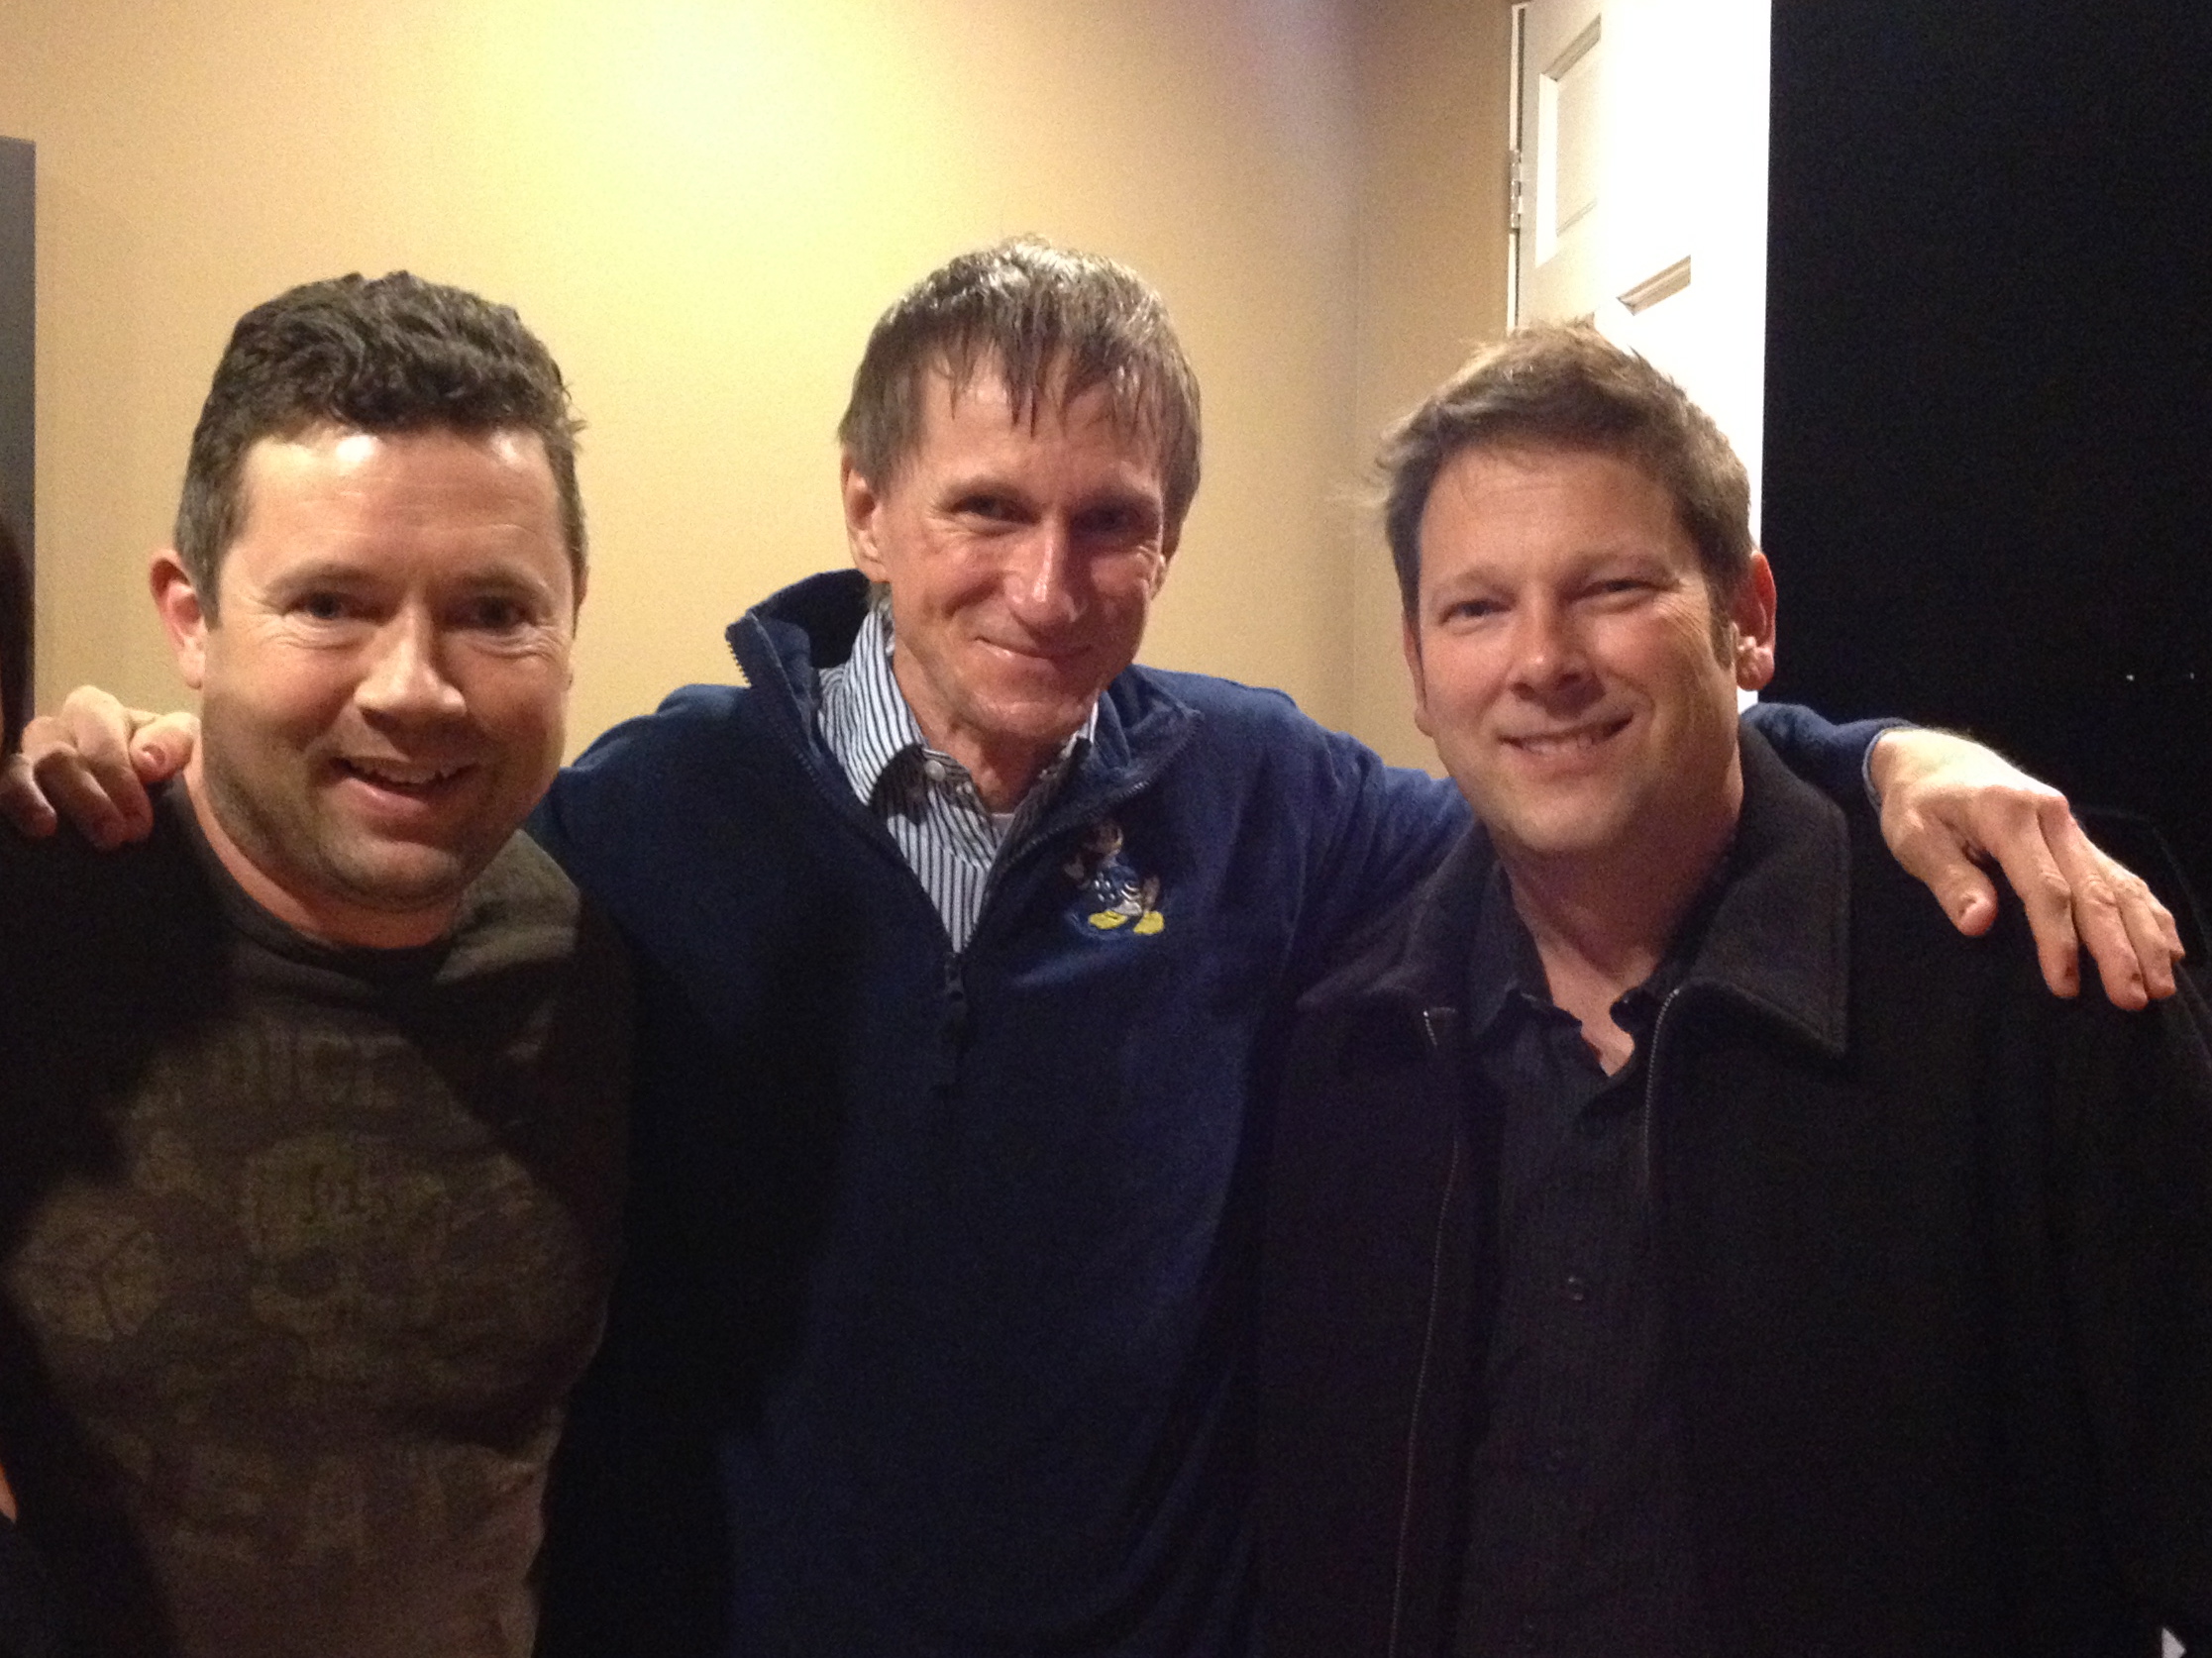 Lee Sanders (right) with Michael McNelly (left) and Bill Oberst, Jr. (center) at the Blood of the Realm trailer shoot, February 2014.